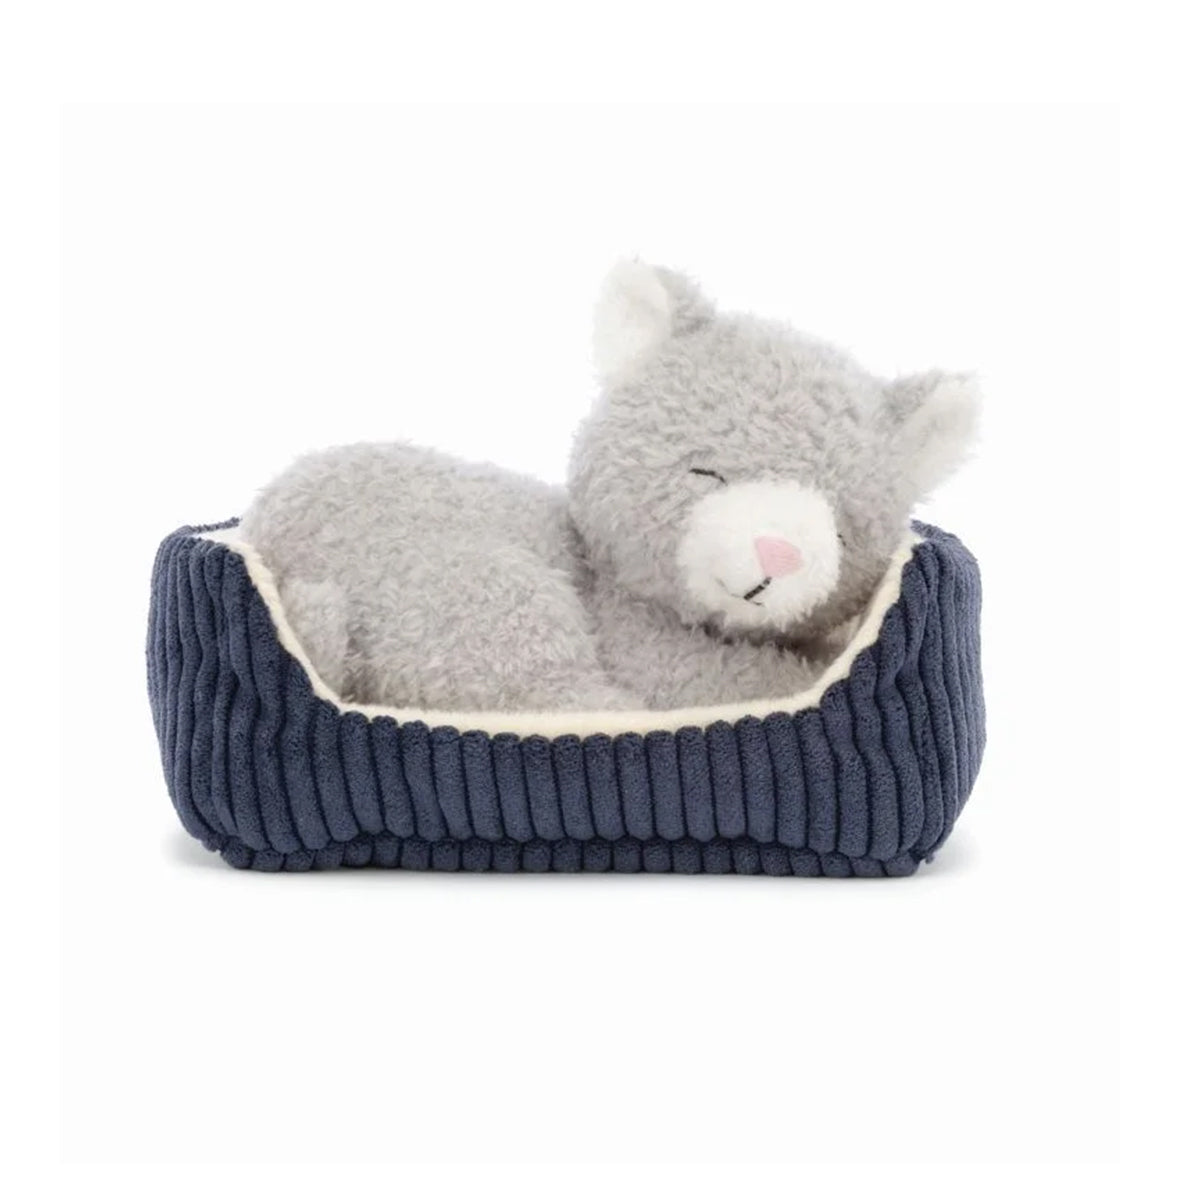 Jellycat Napping Nipper Cat Plush Toy